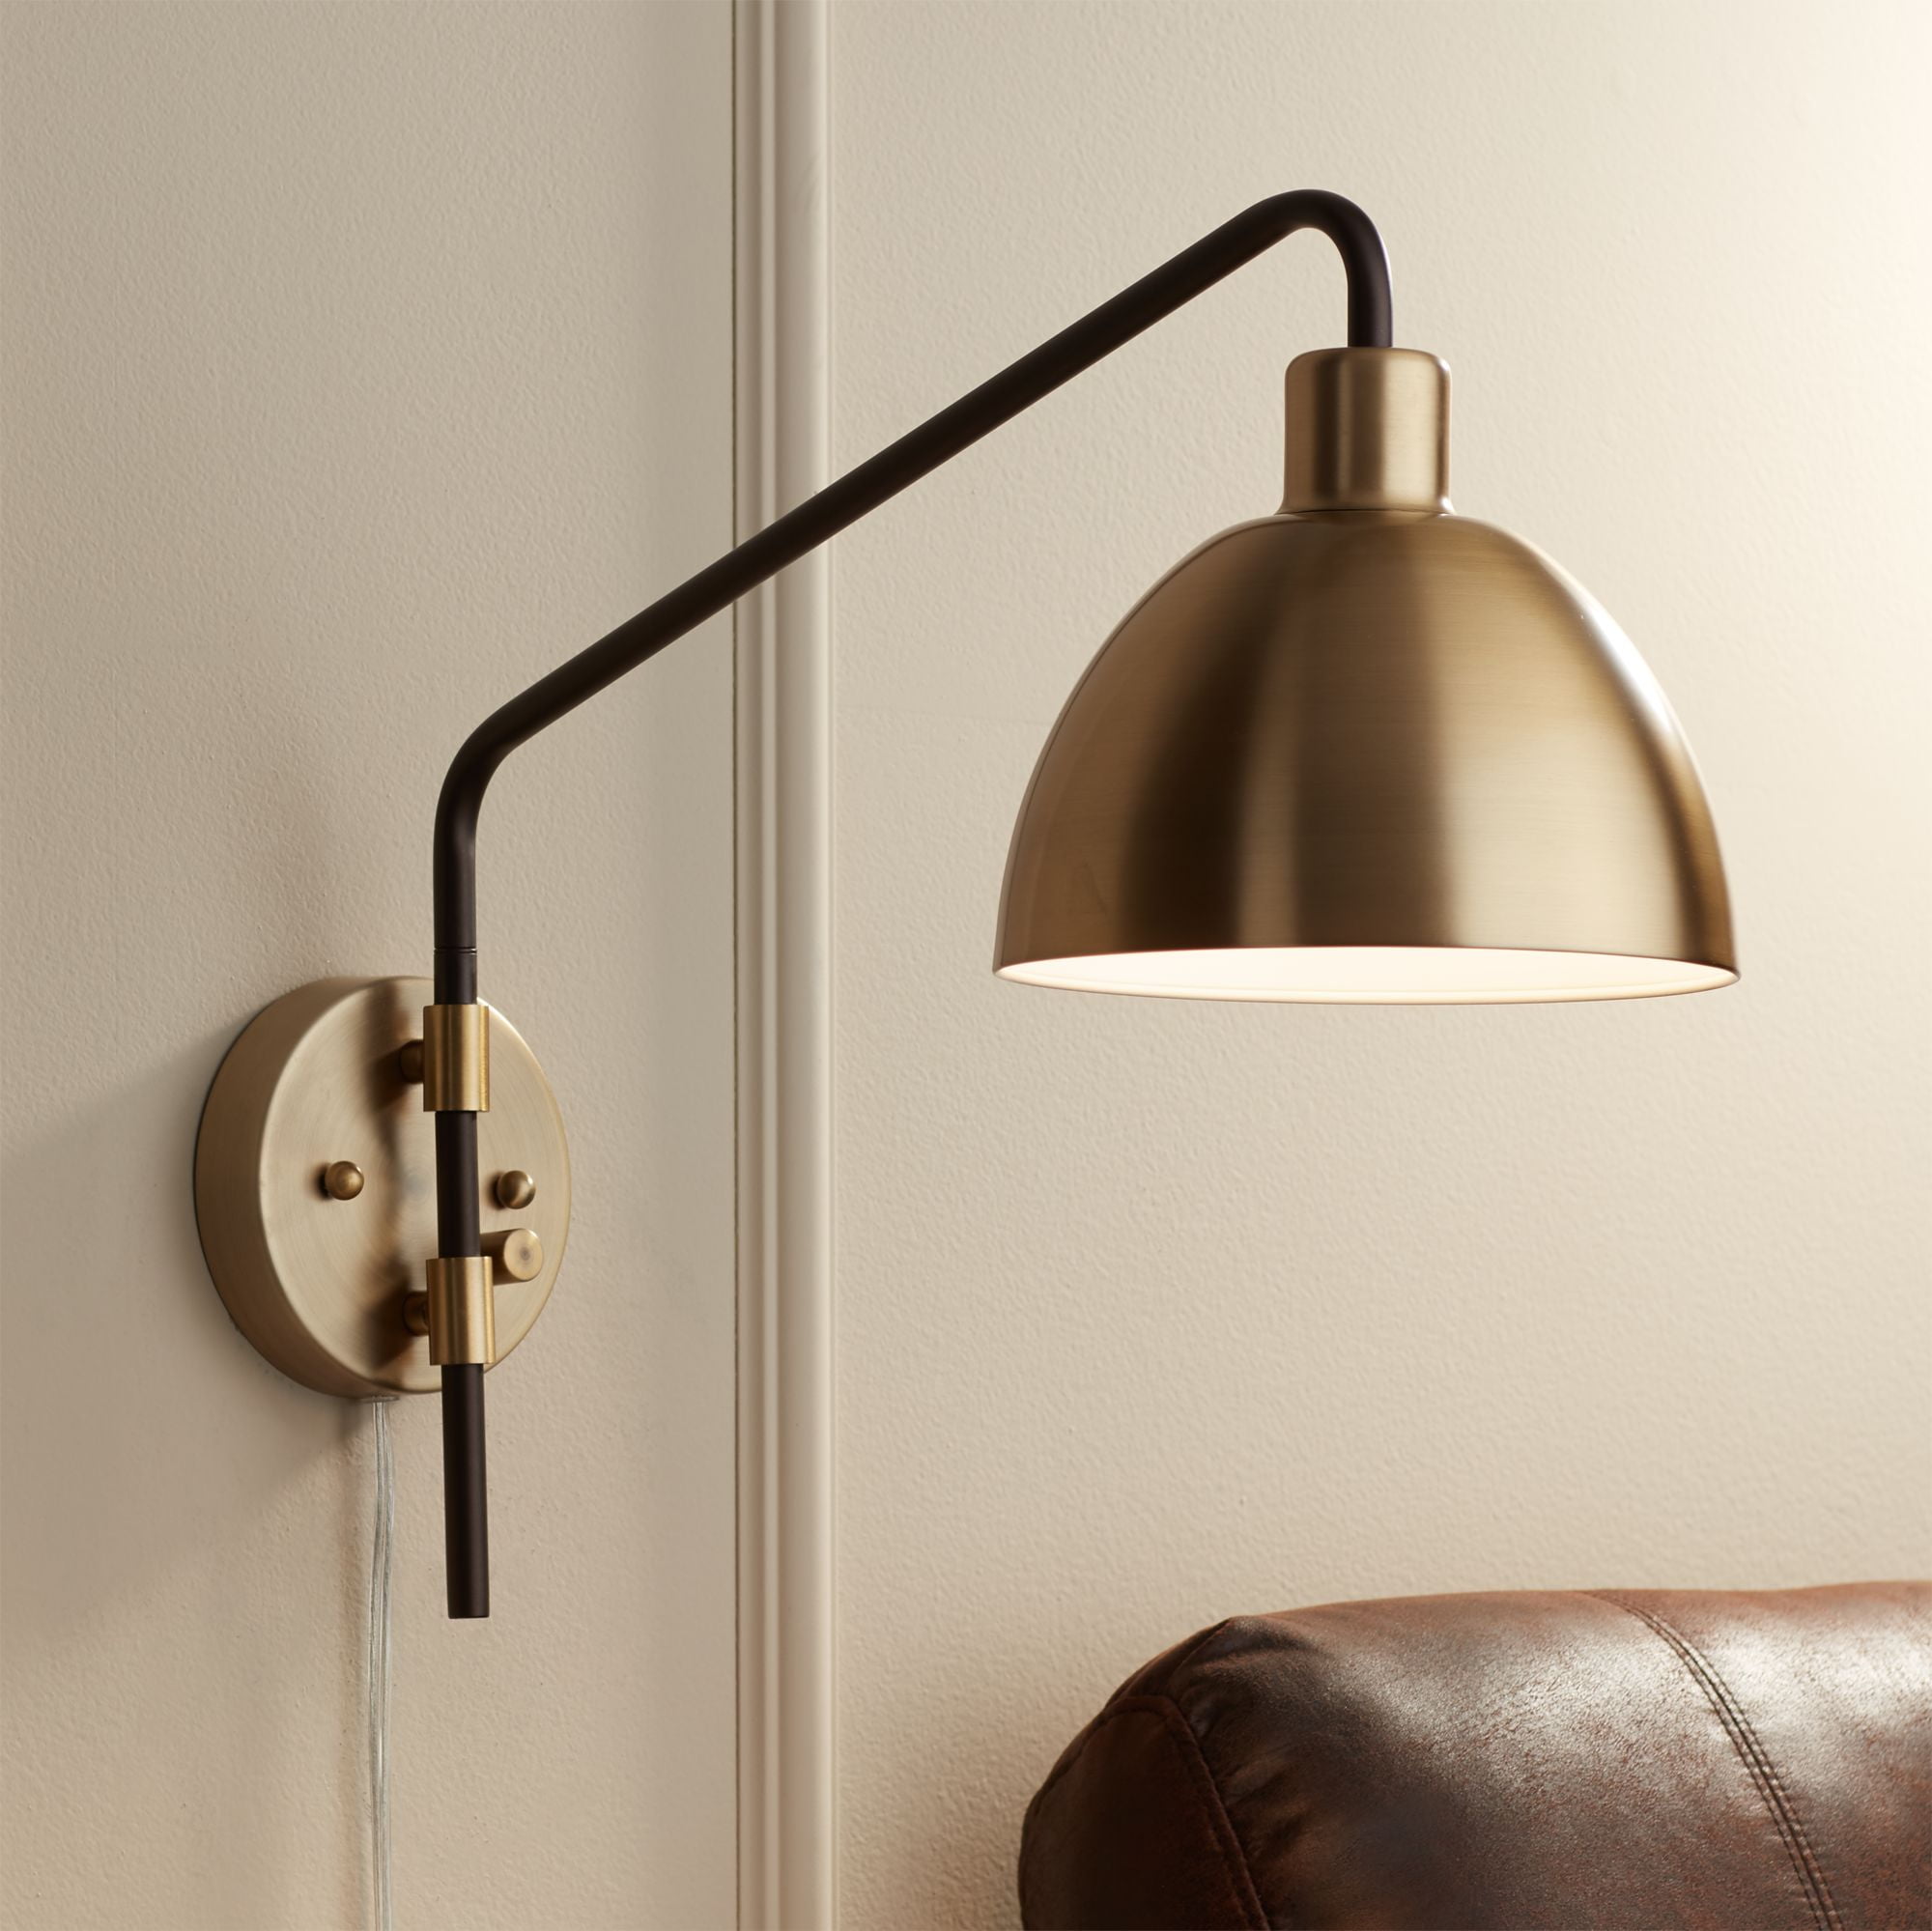 Retro Industrial Wall Lamp Plug in Wall Sconce Swing Arm Light Reading Bedside 